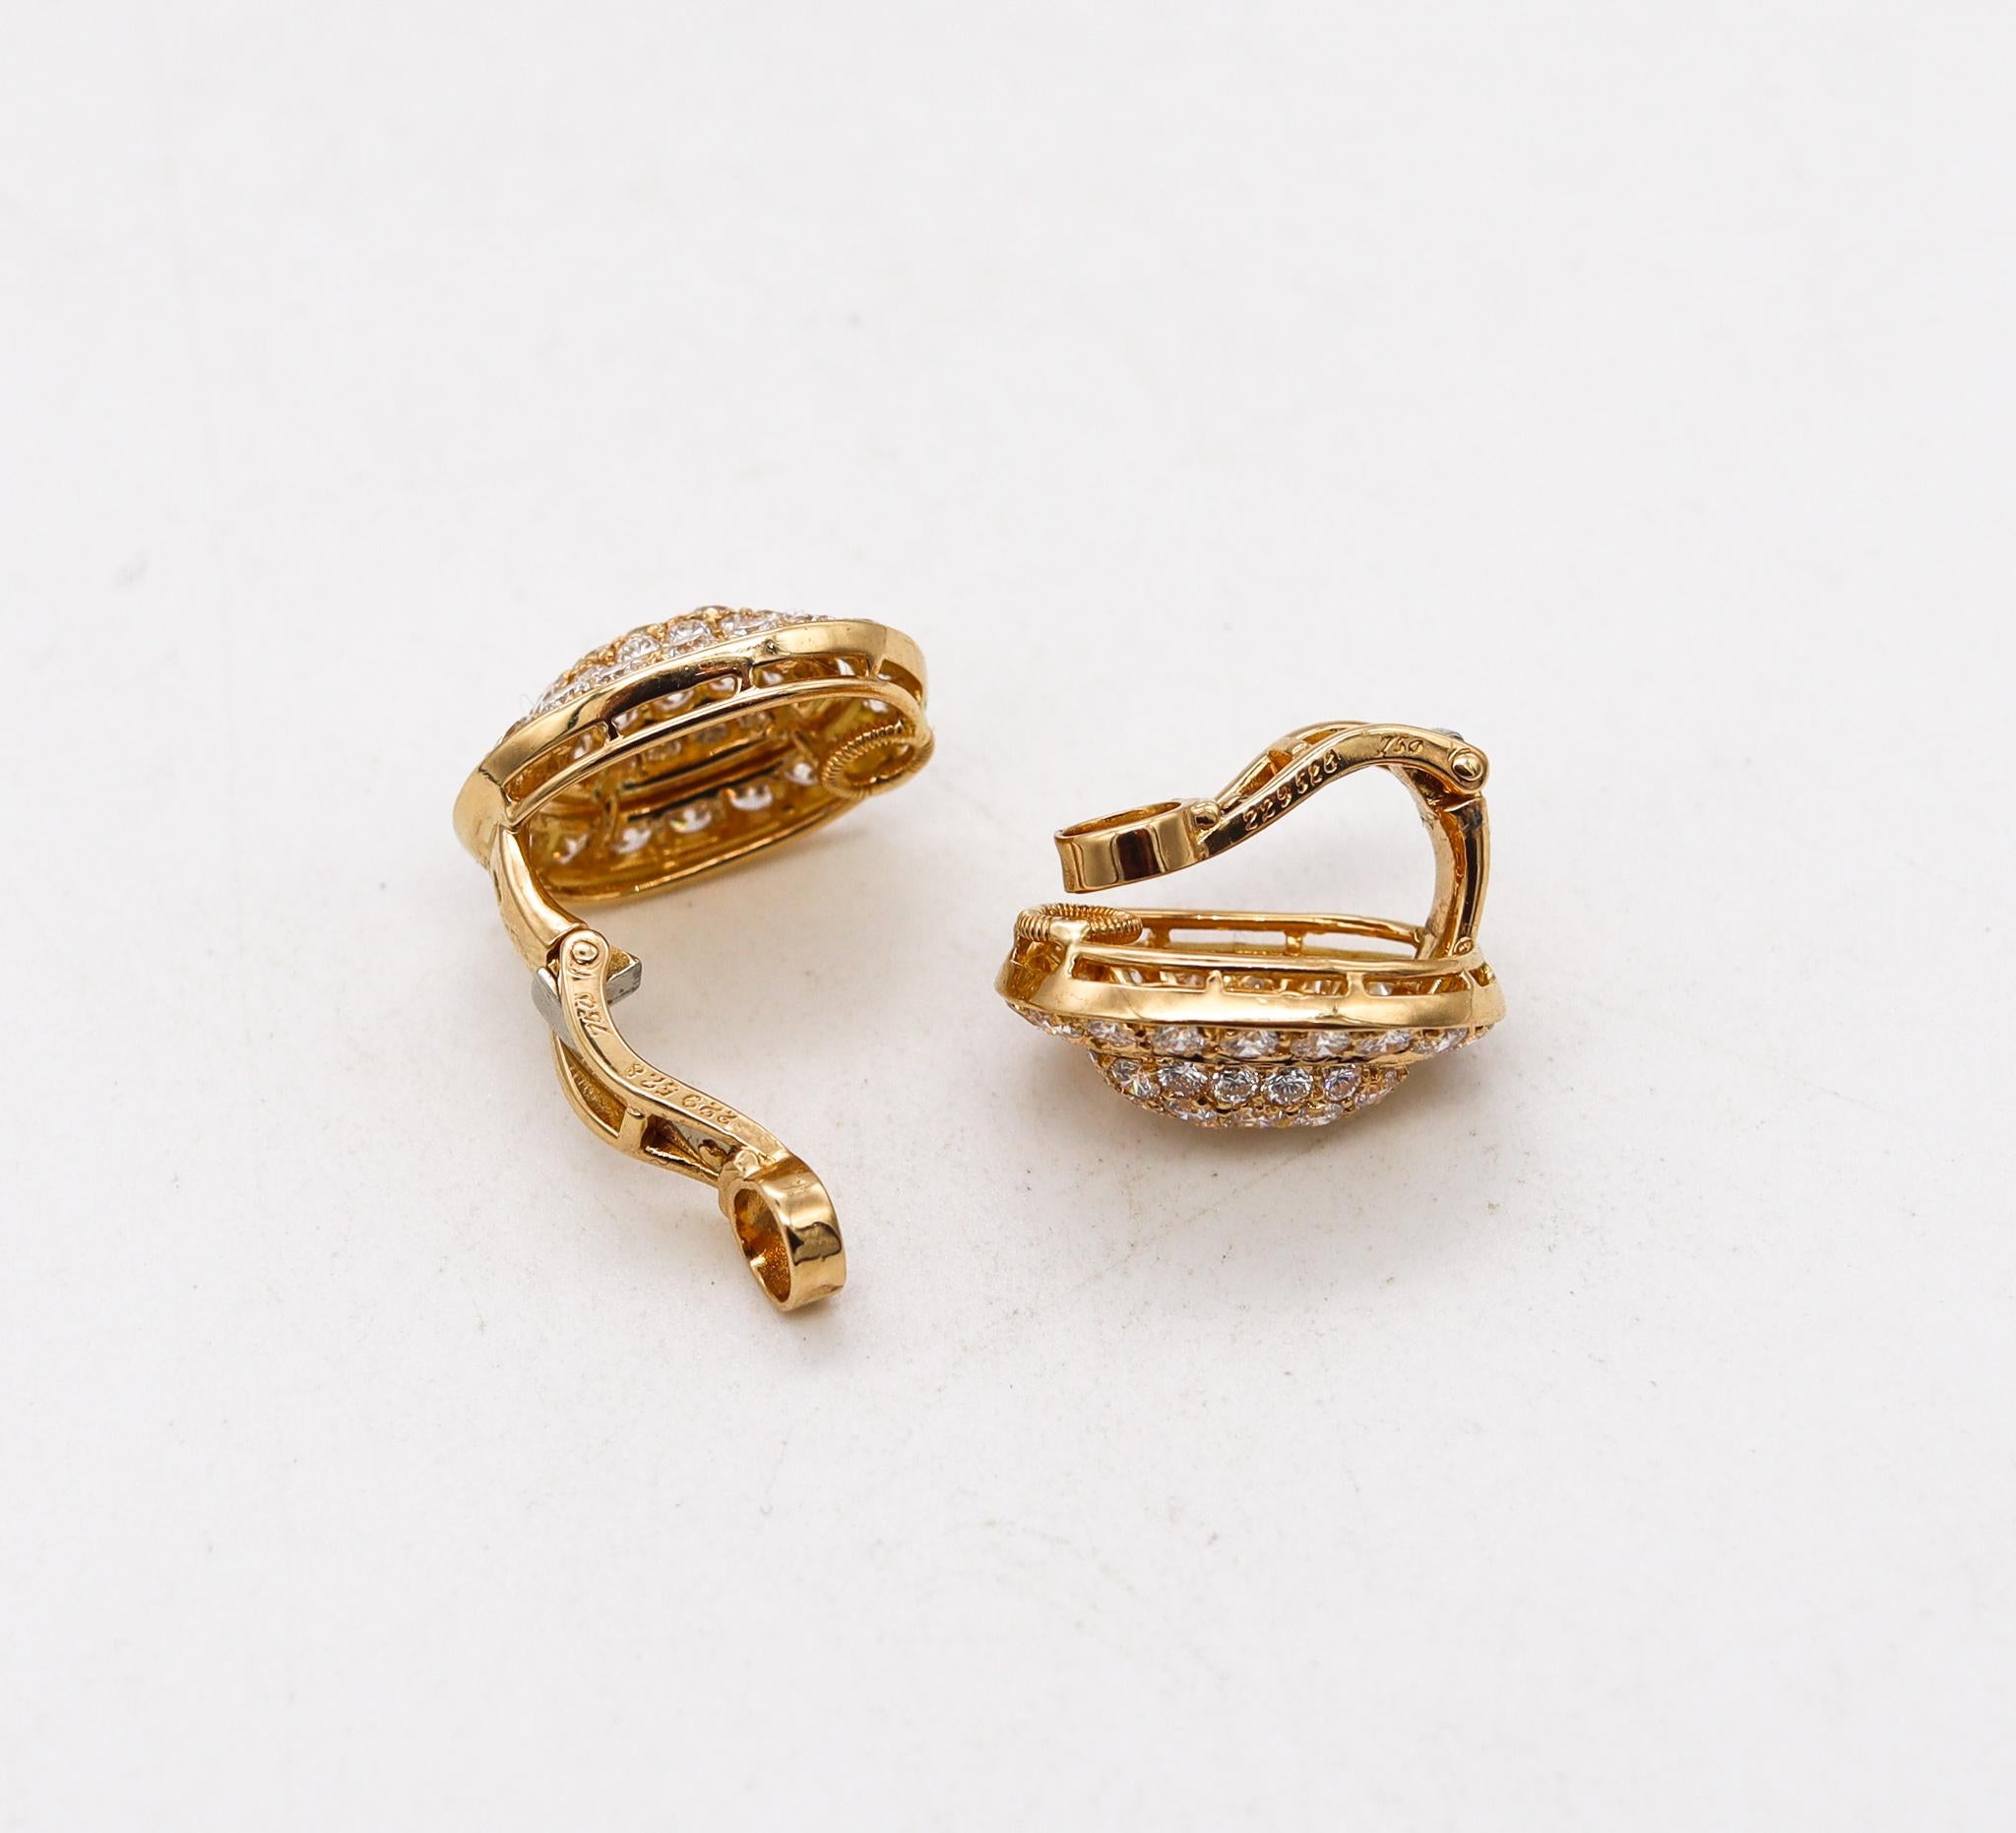 Brilliant Cut Cartier Paris Clip Earrings in 18kt Yellow Gold with 4.42 Cts in VS Diamonds Box